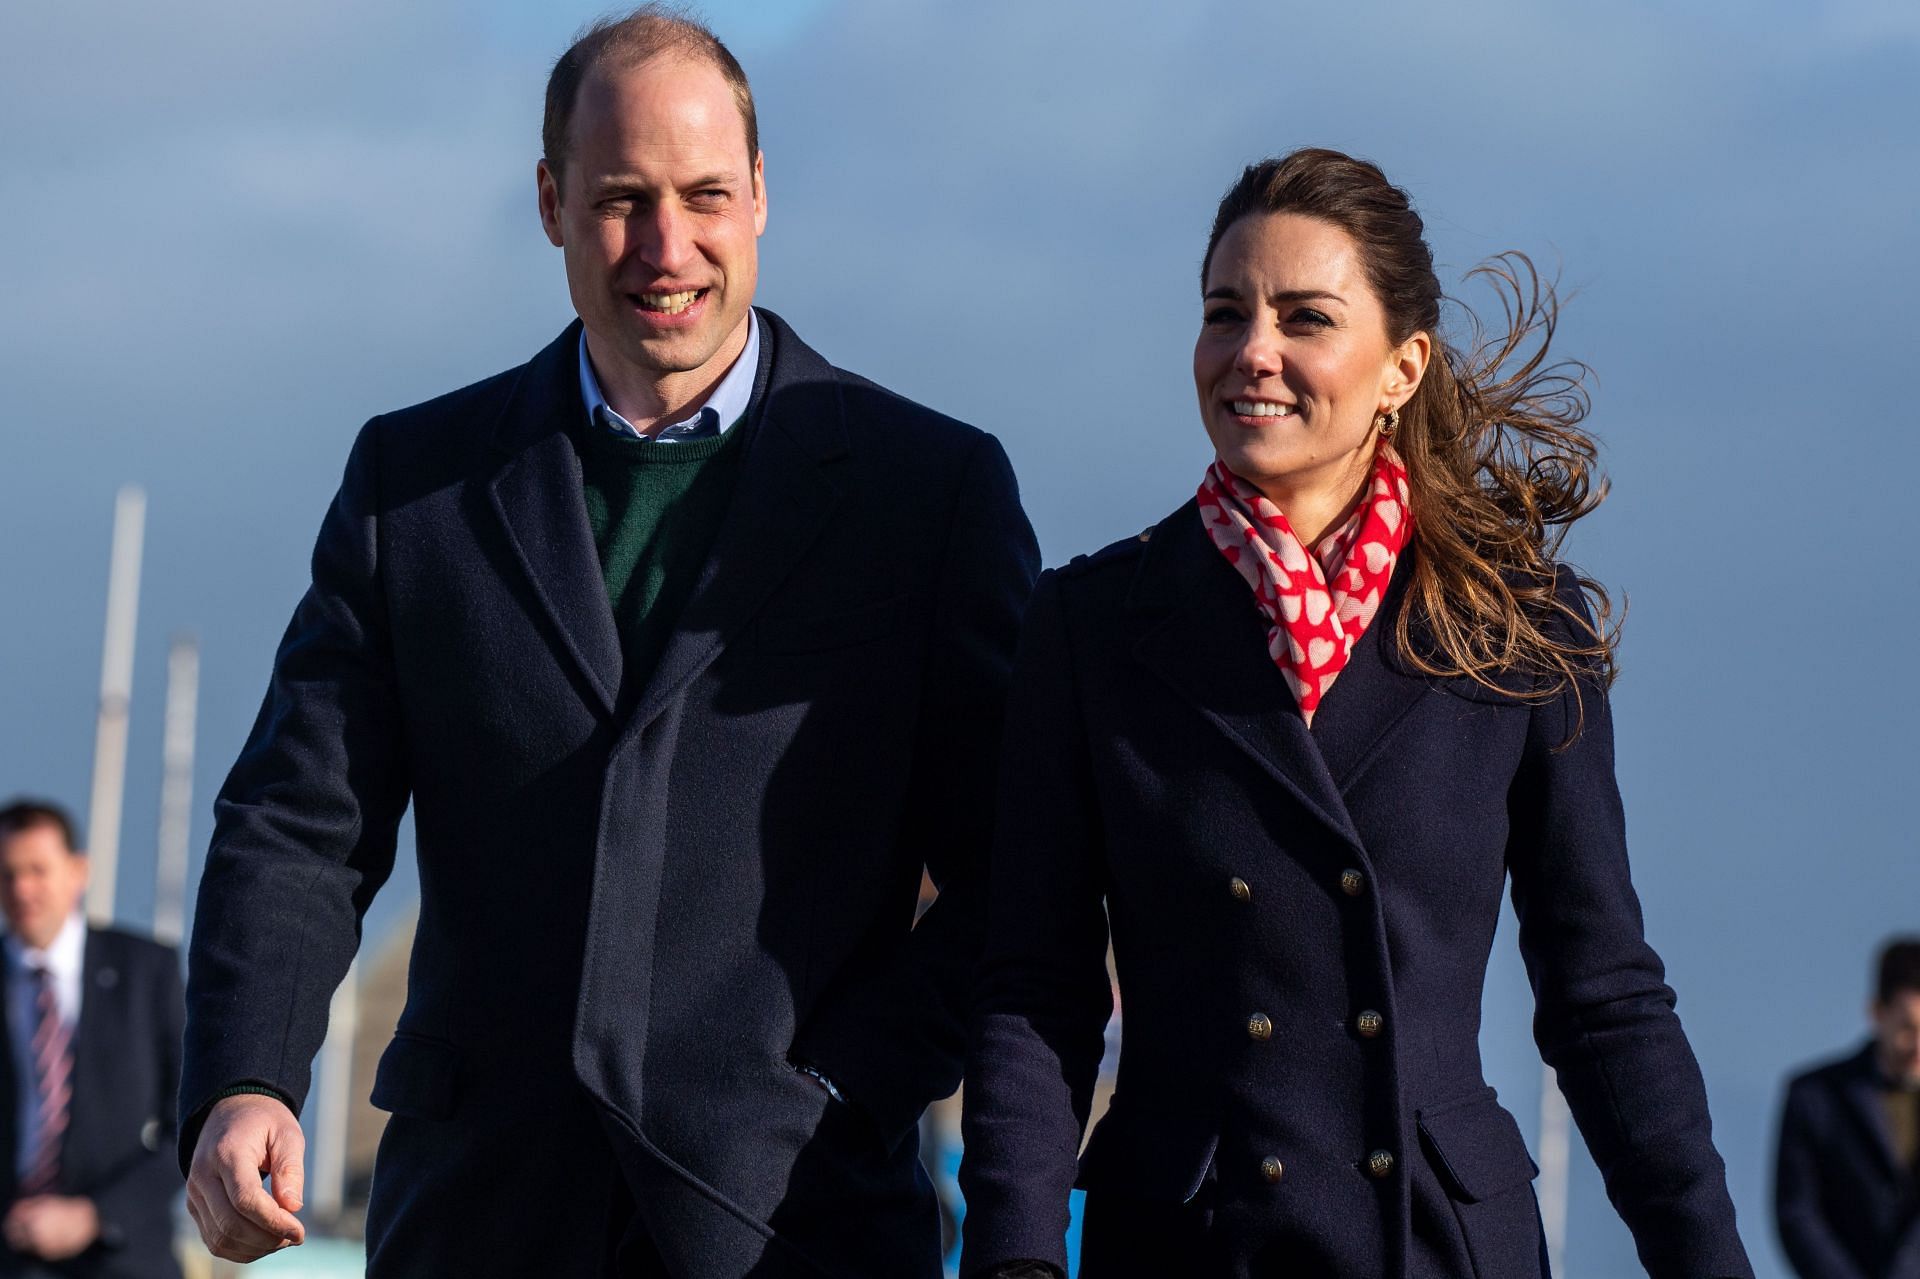 The Duke And Duchess Of Cambridge Visit South Wales (Image via Getty)